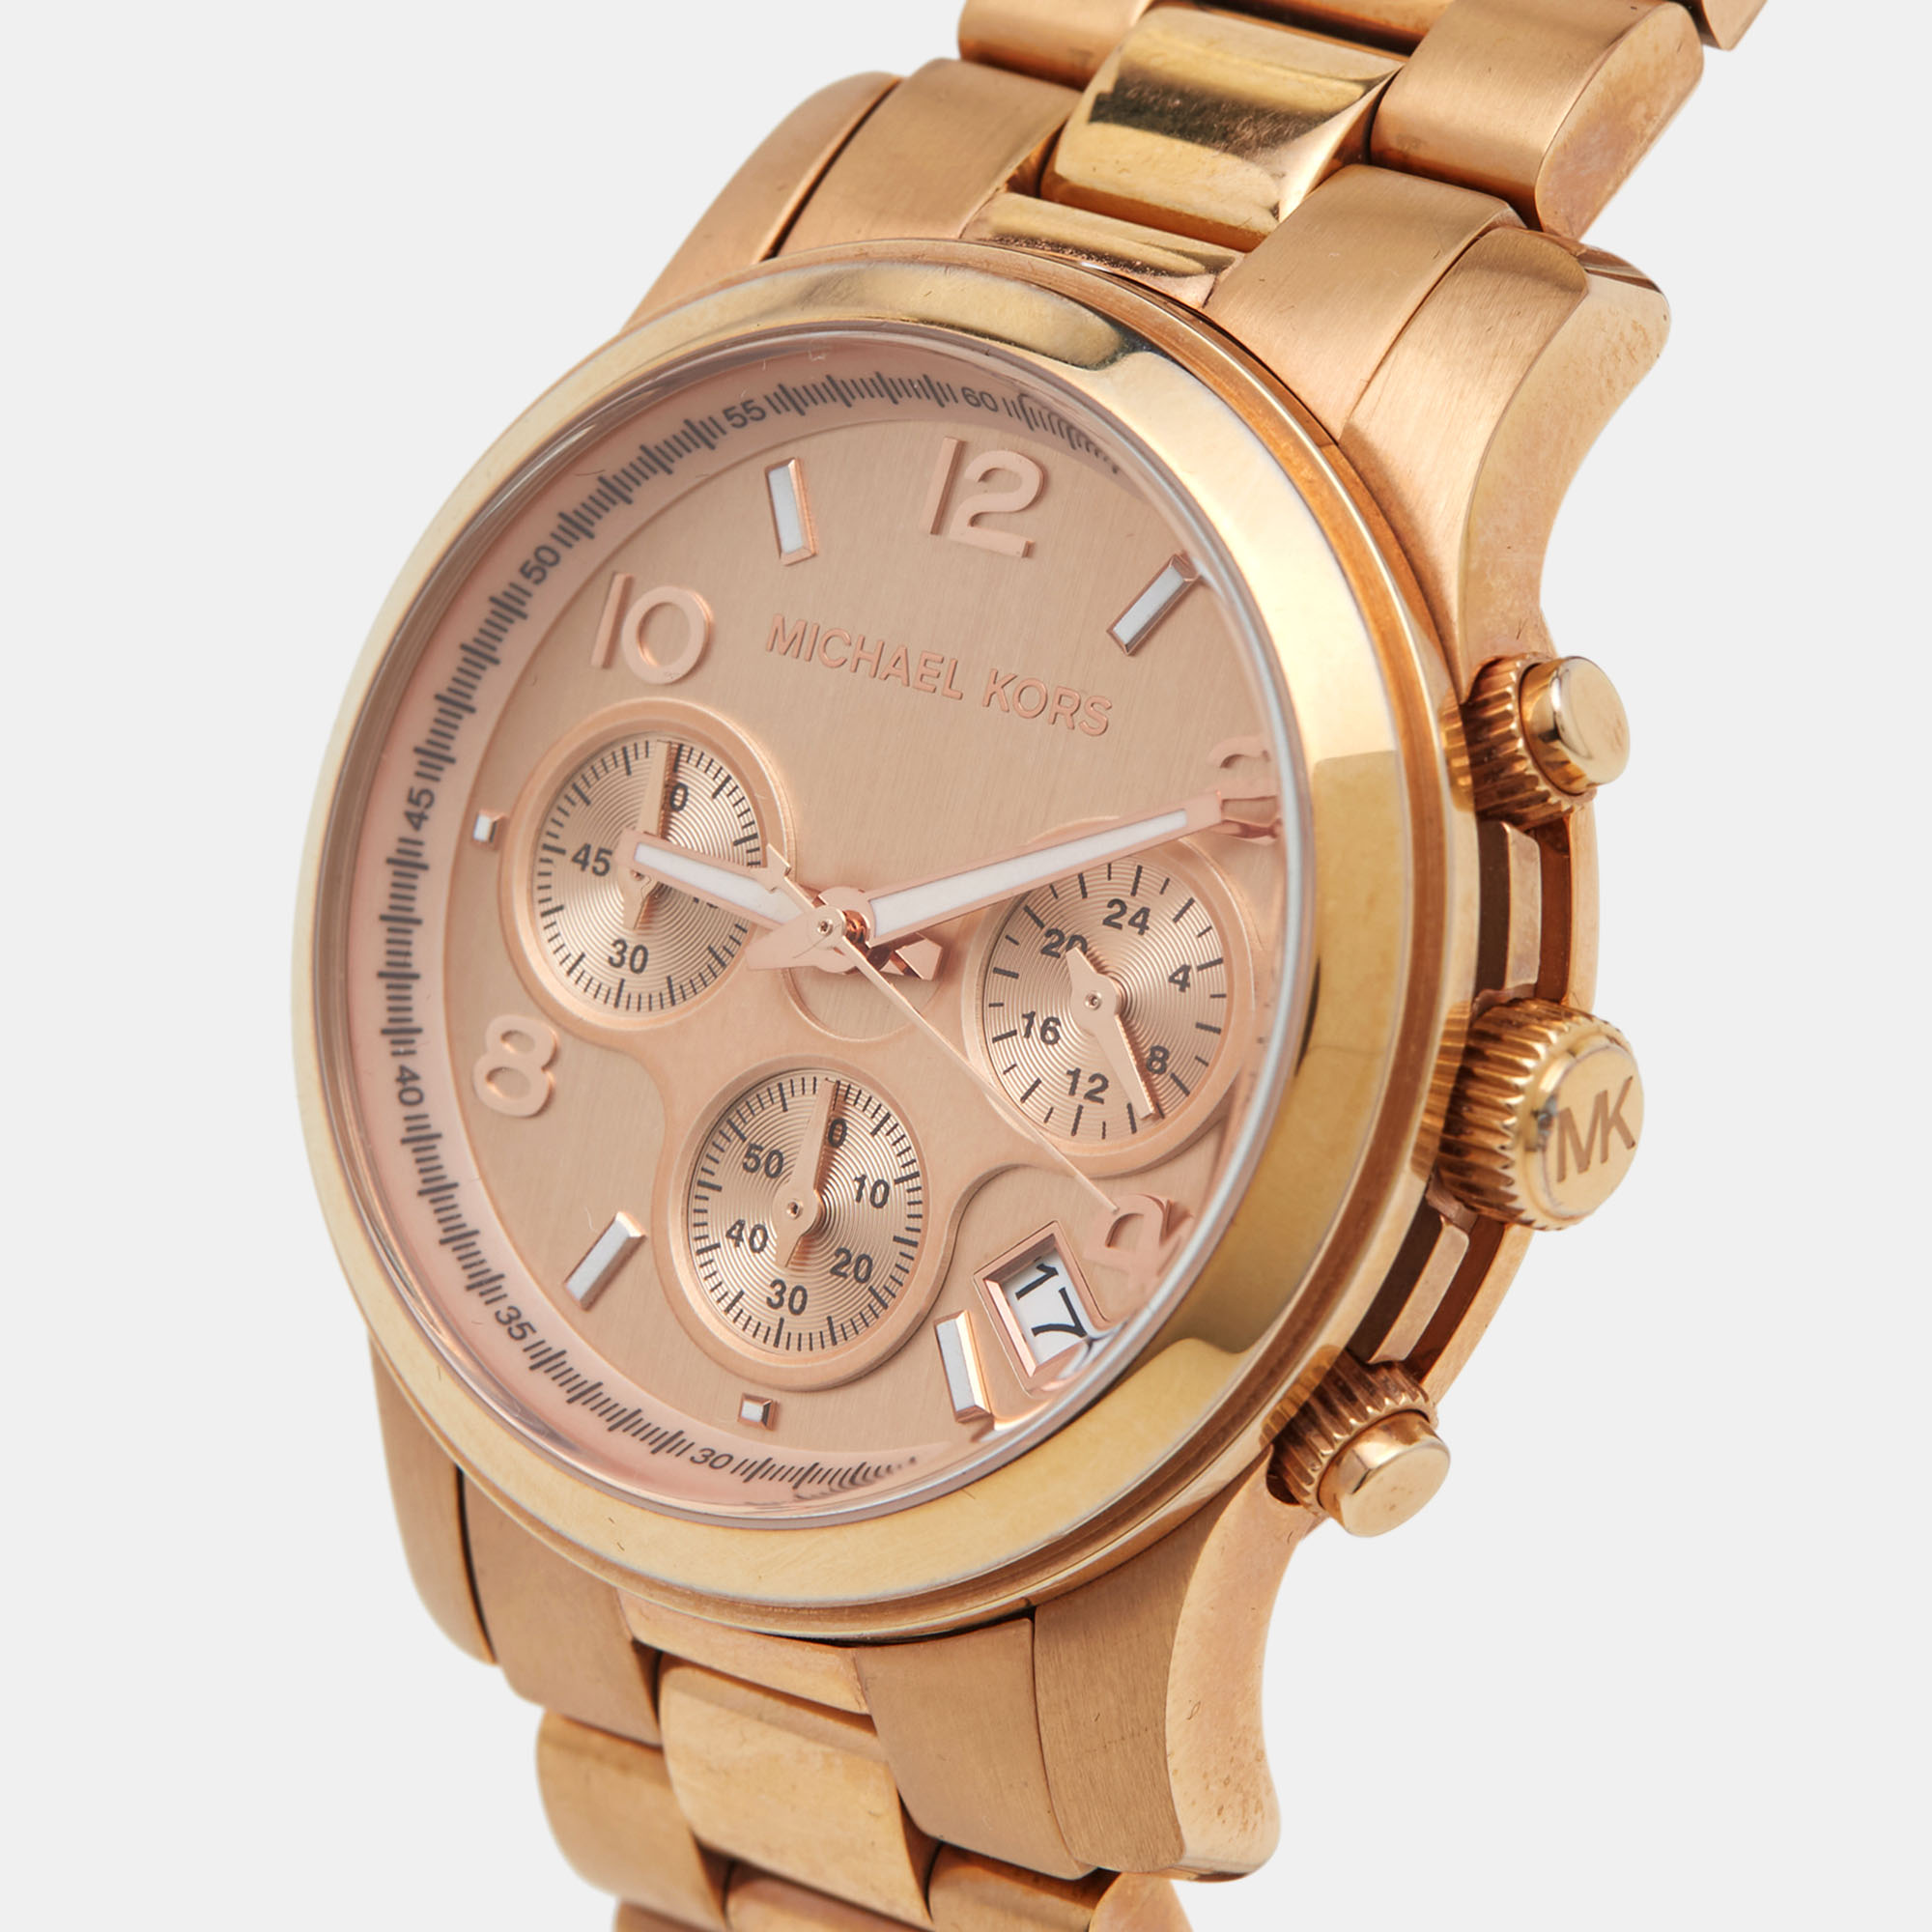 

Mickael Kors Champagne Rose Gold Plated Stainless Steel Runway MK5128 Women's Wristwatch